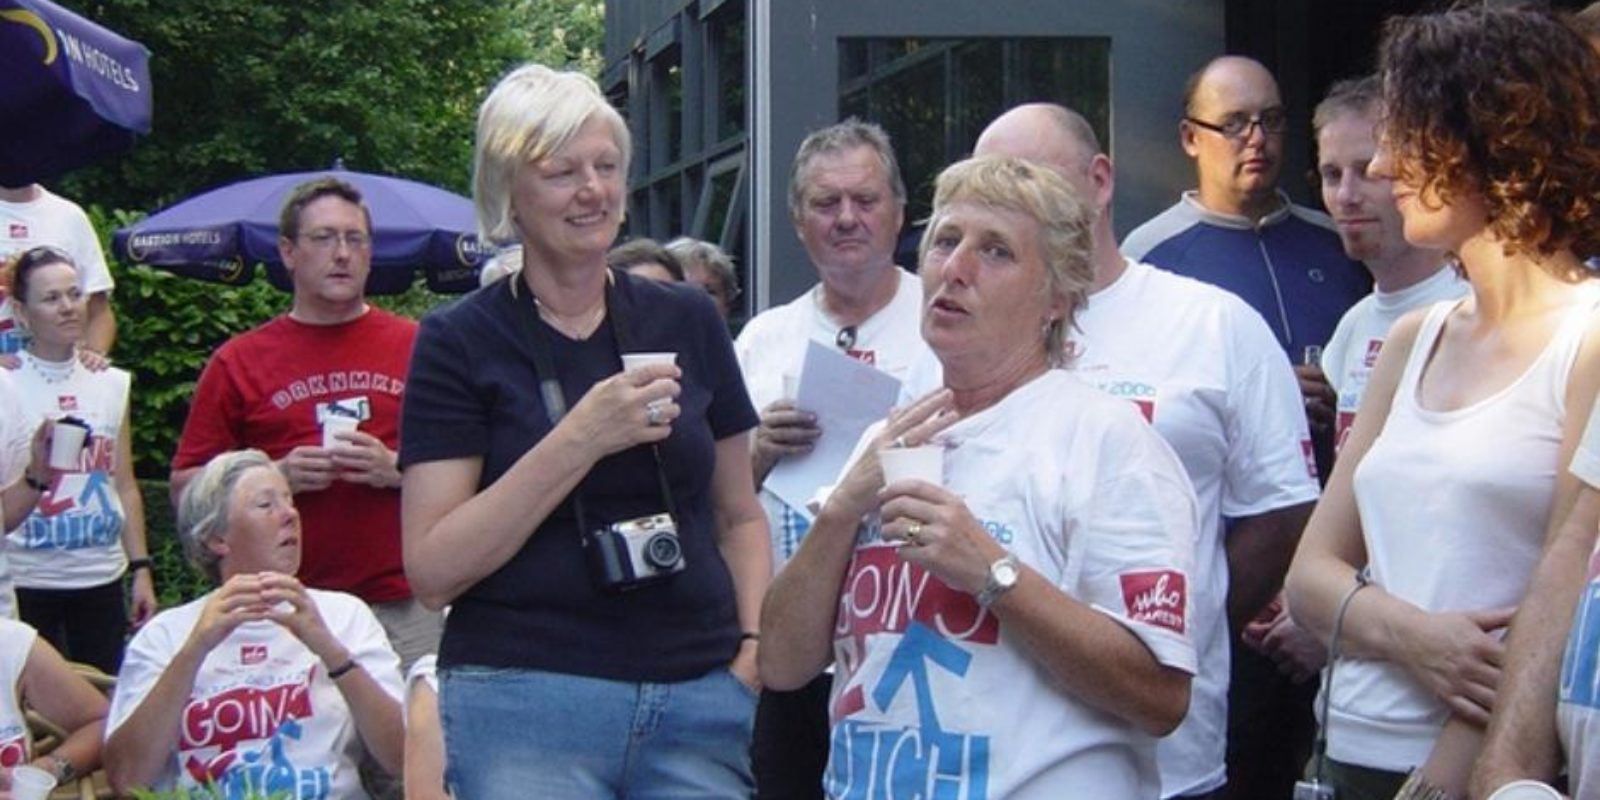 Gill and Peggy speak to a crowd of cyclists